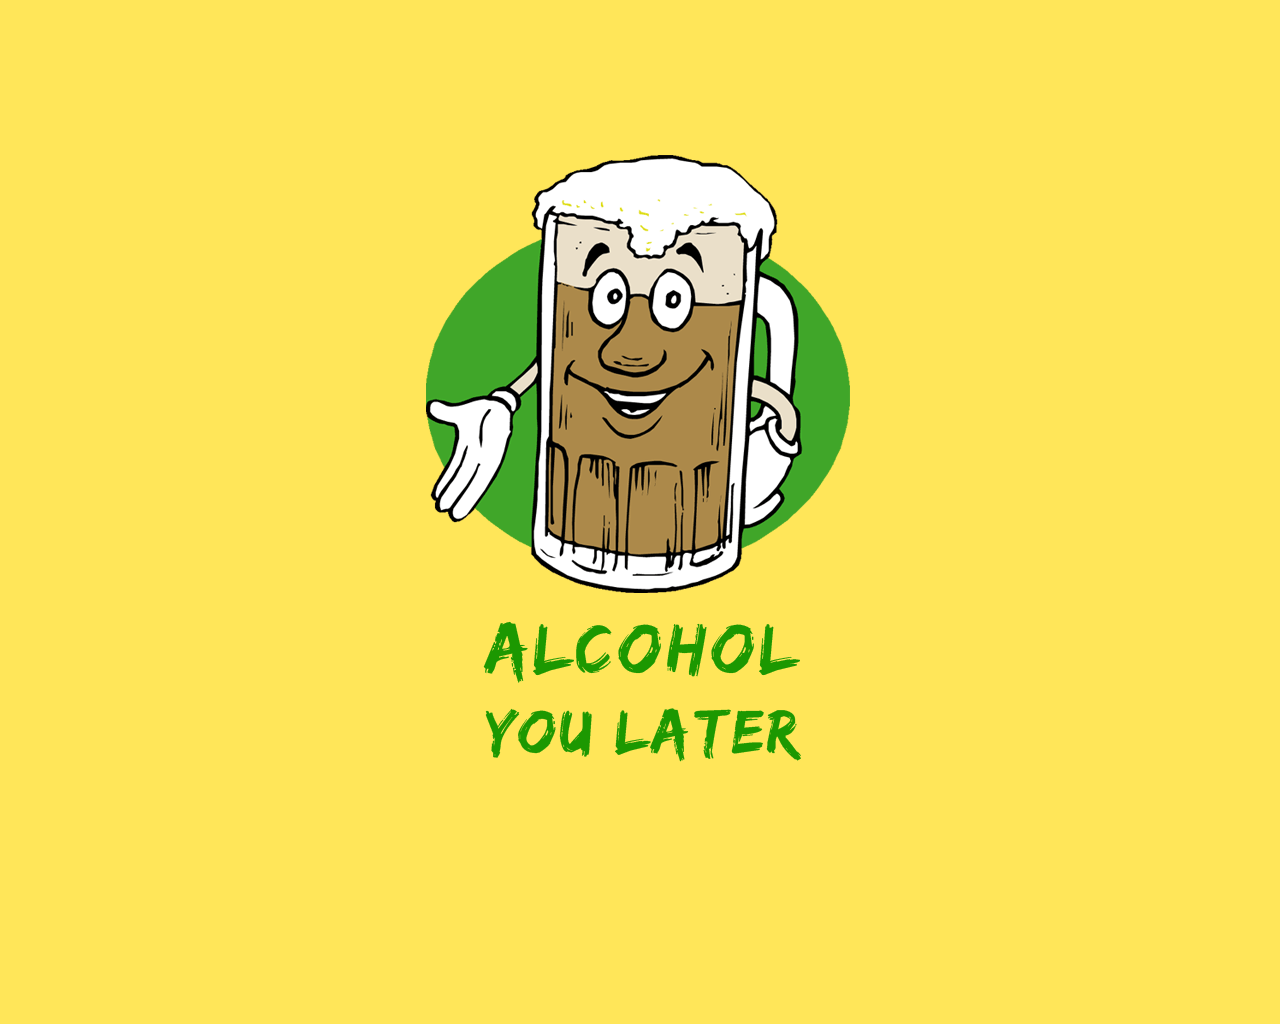 Slogan About Drinking Alcohol - HD Wallpaper 